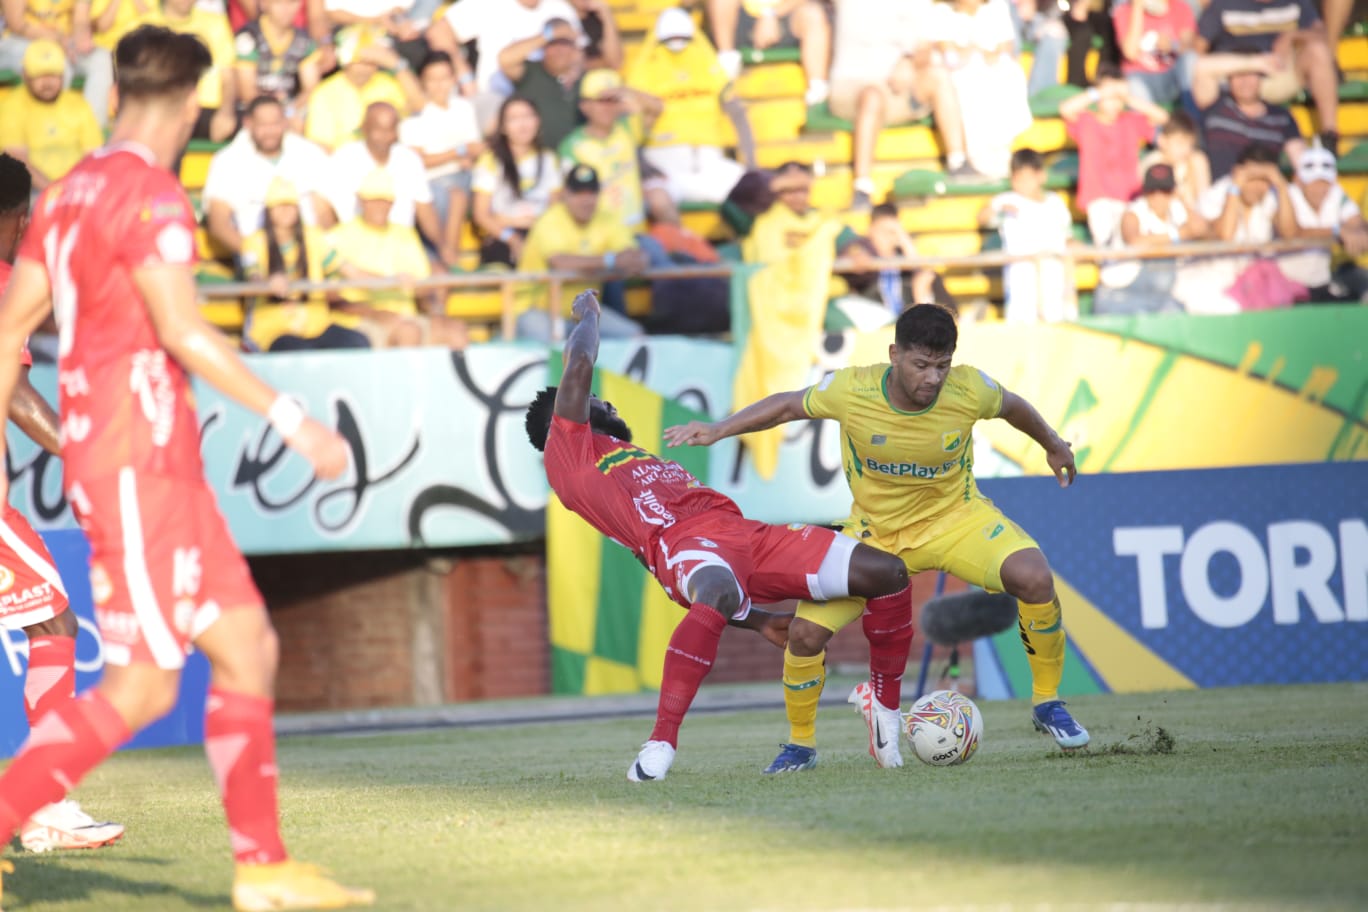 Atlético Huila received once more by beating Real Cartagena at dwelling